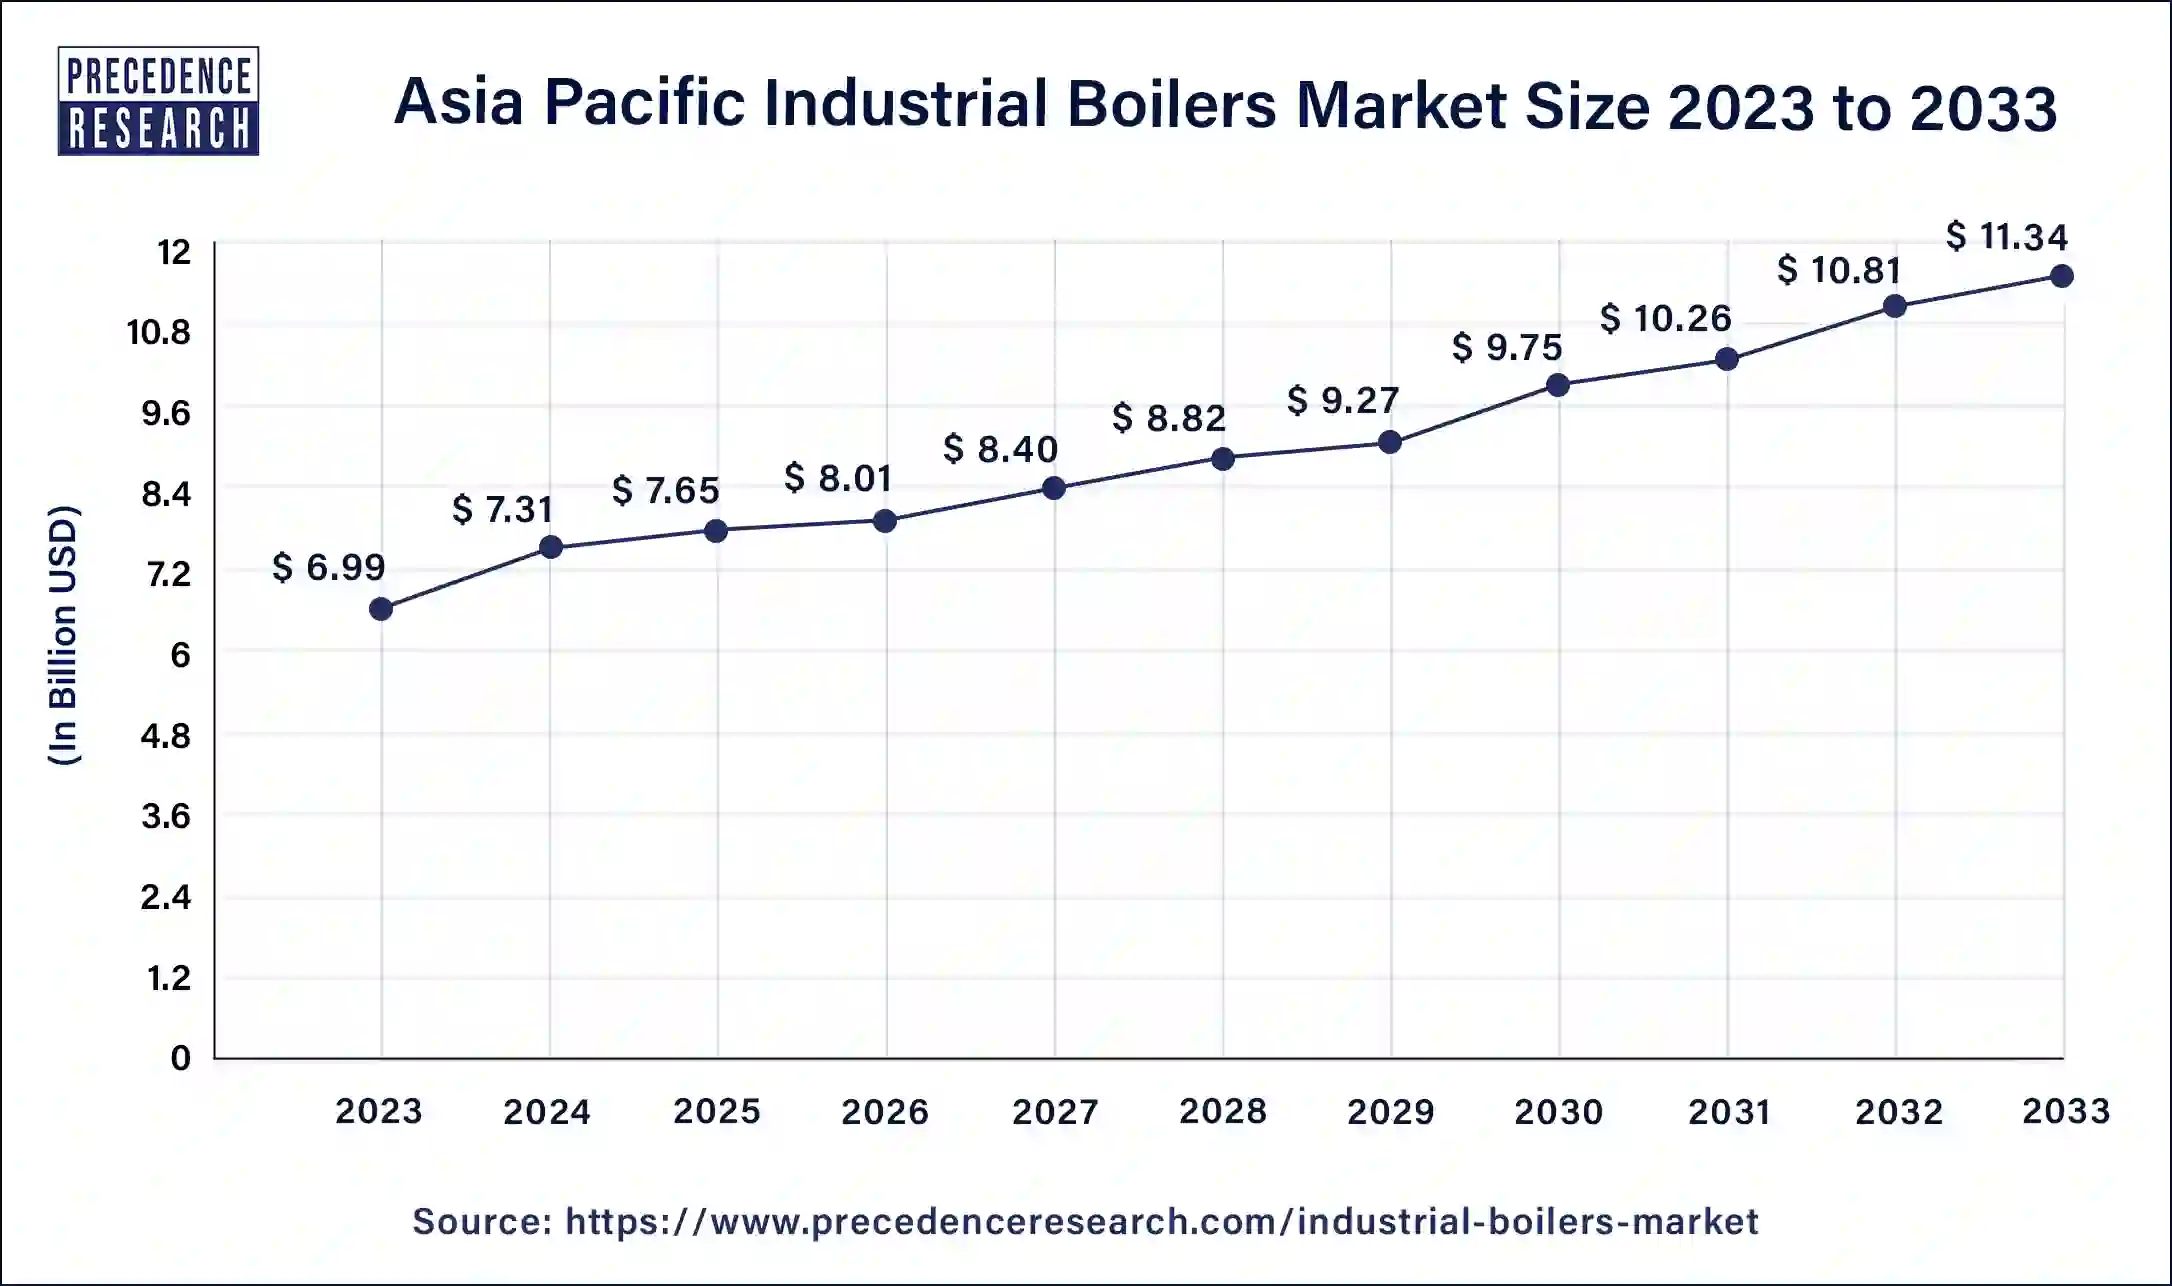 Asia Pacific Industrial Boilers Market Size 2024 to 2033